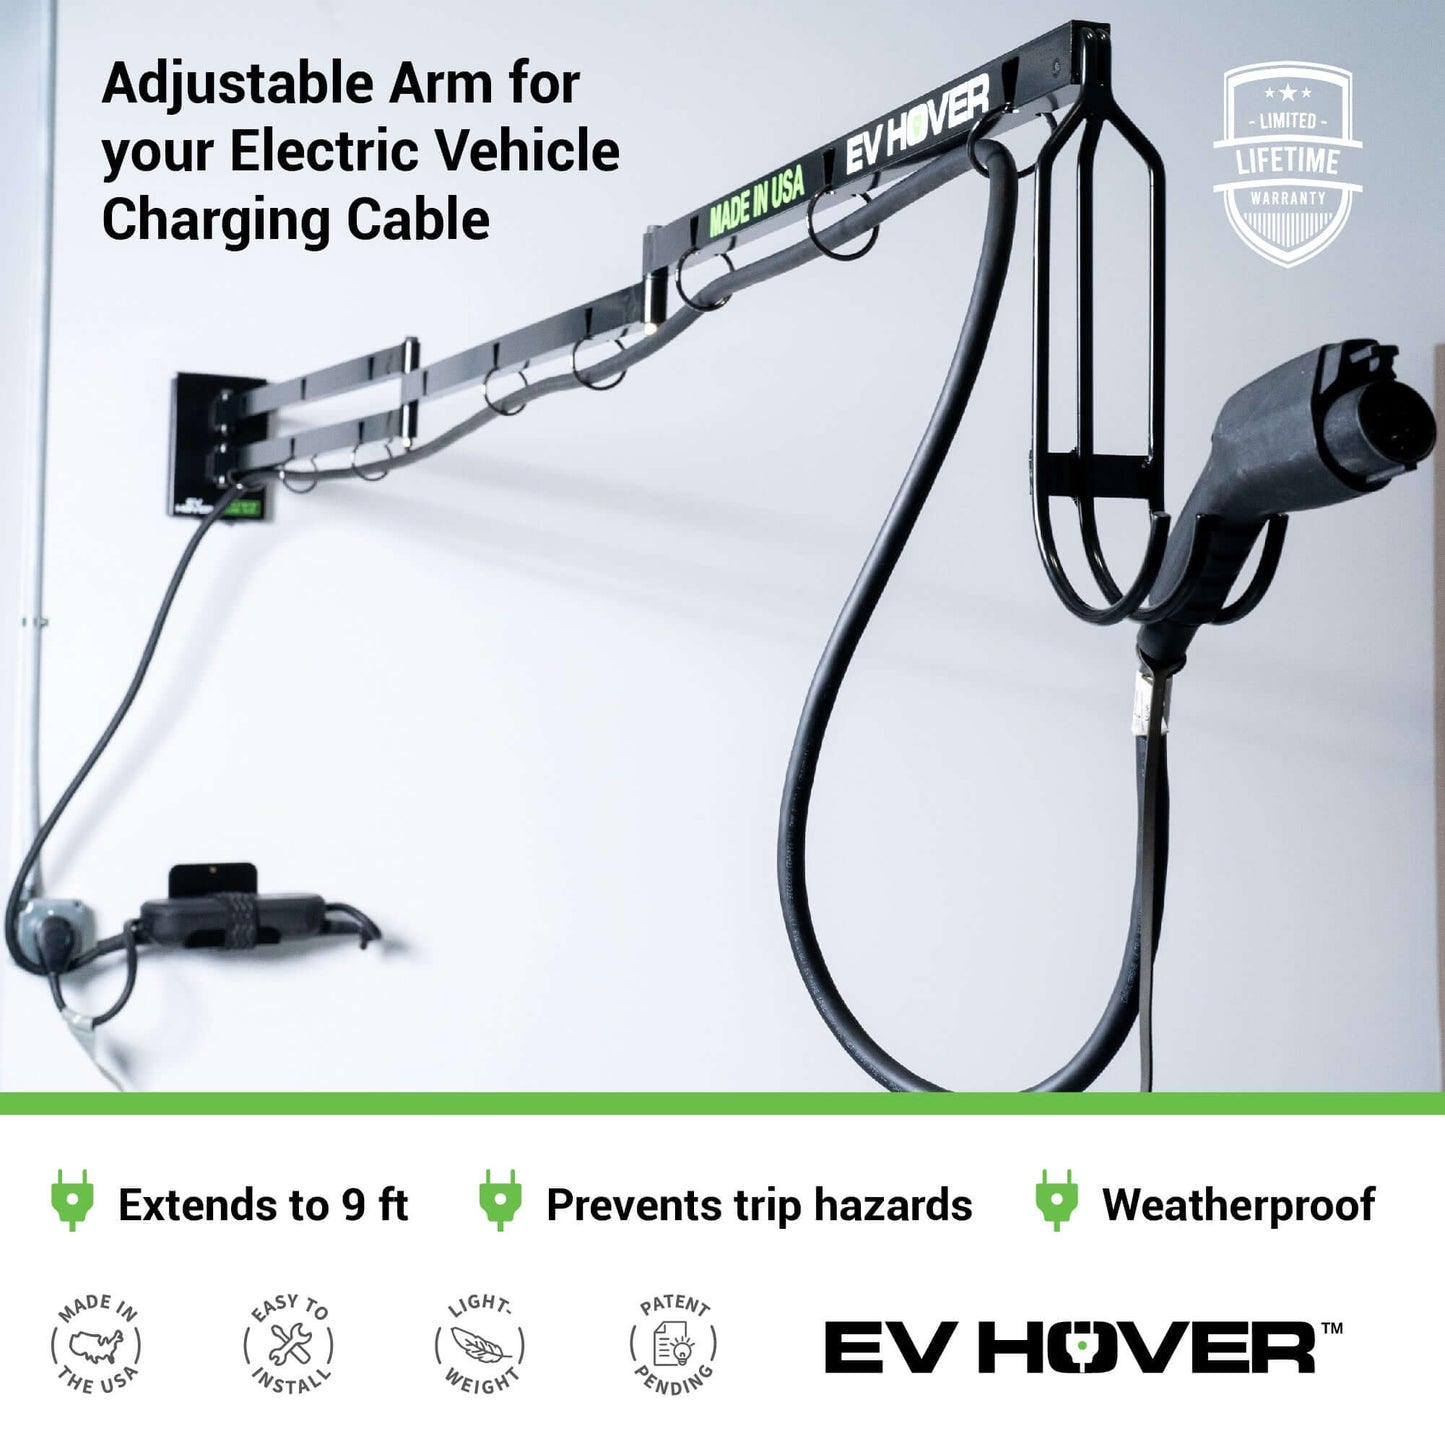 Adjustable arm for your electric vehicle charging cable